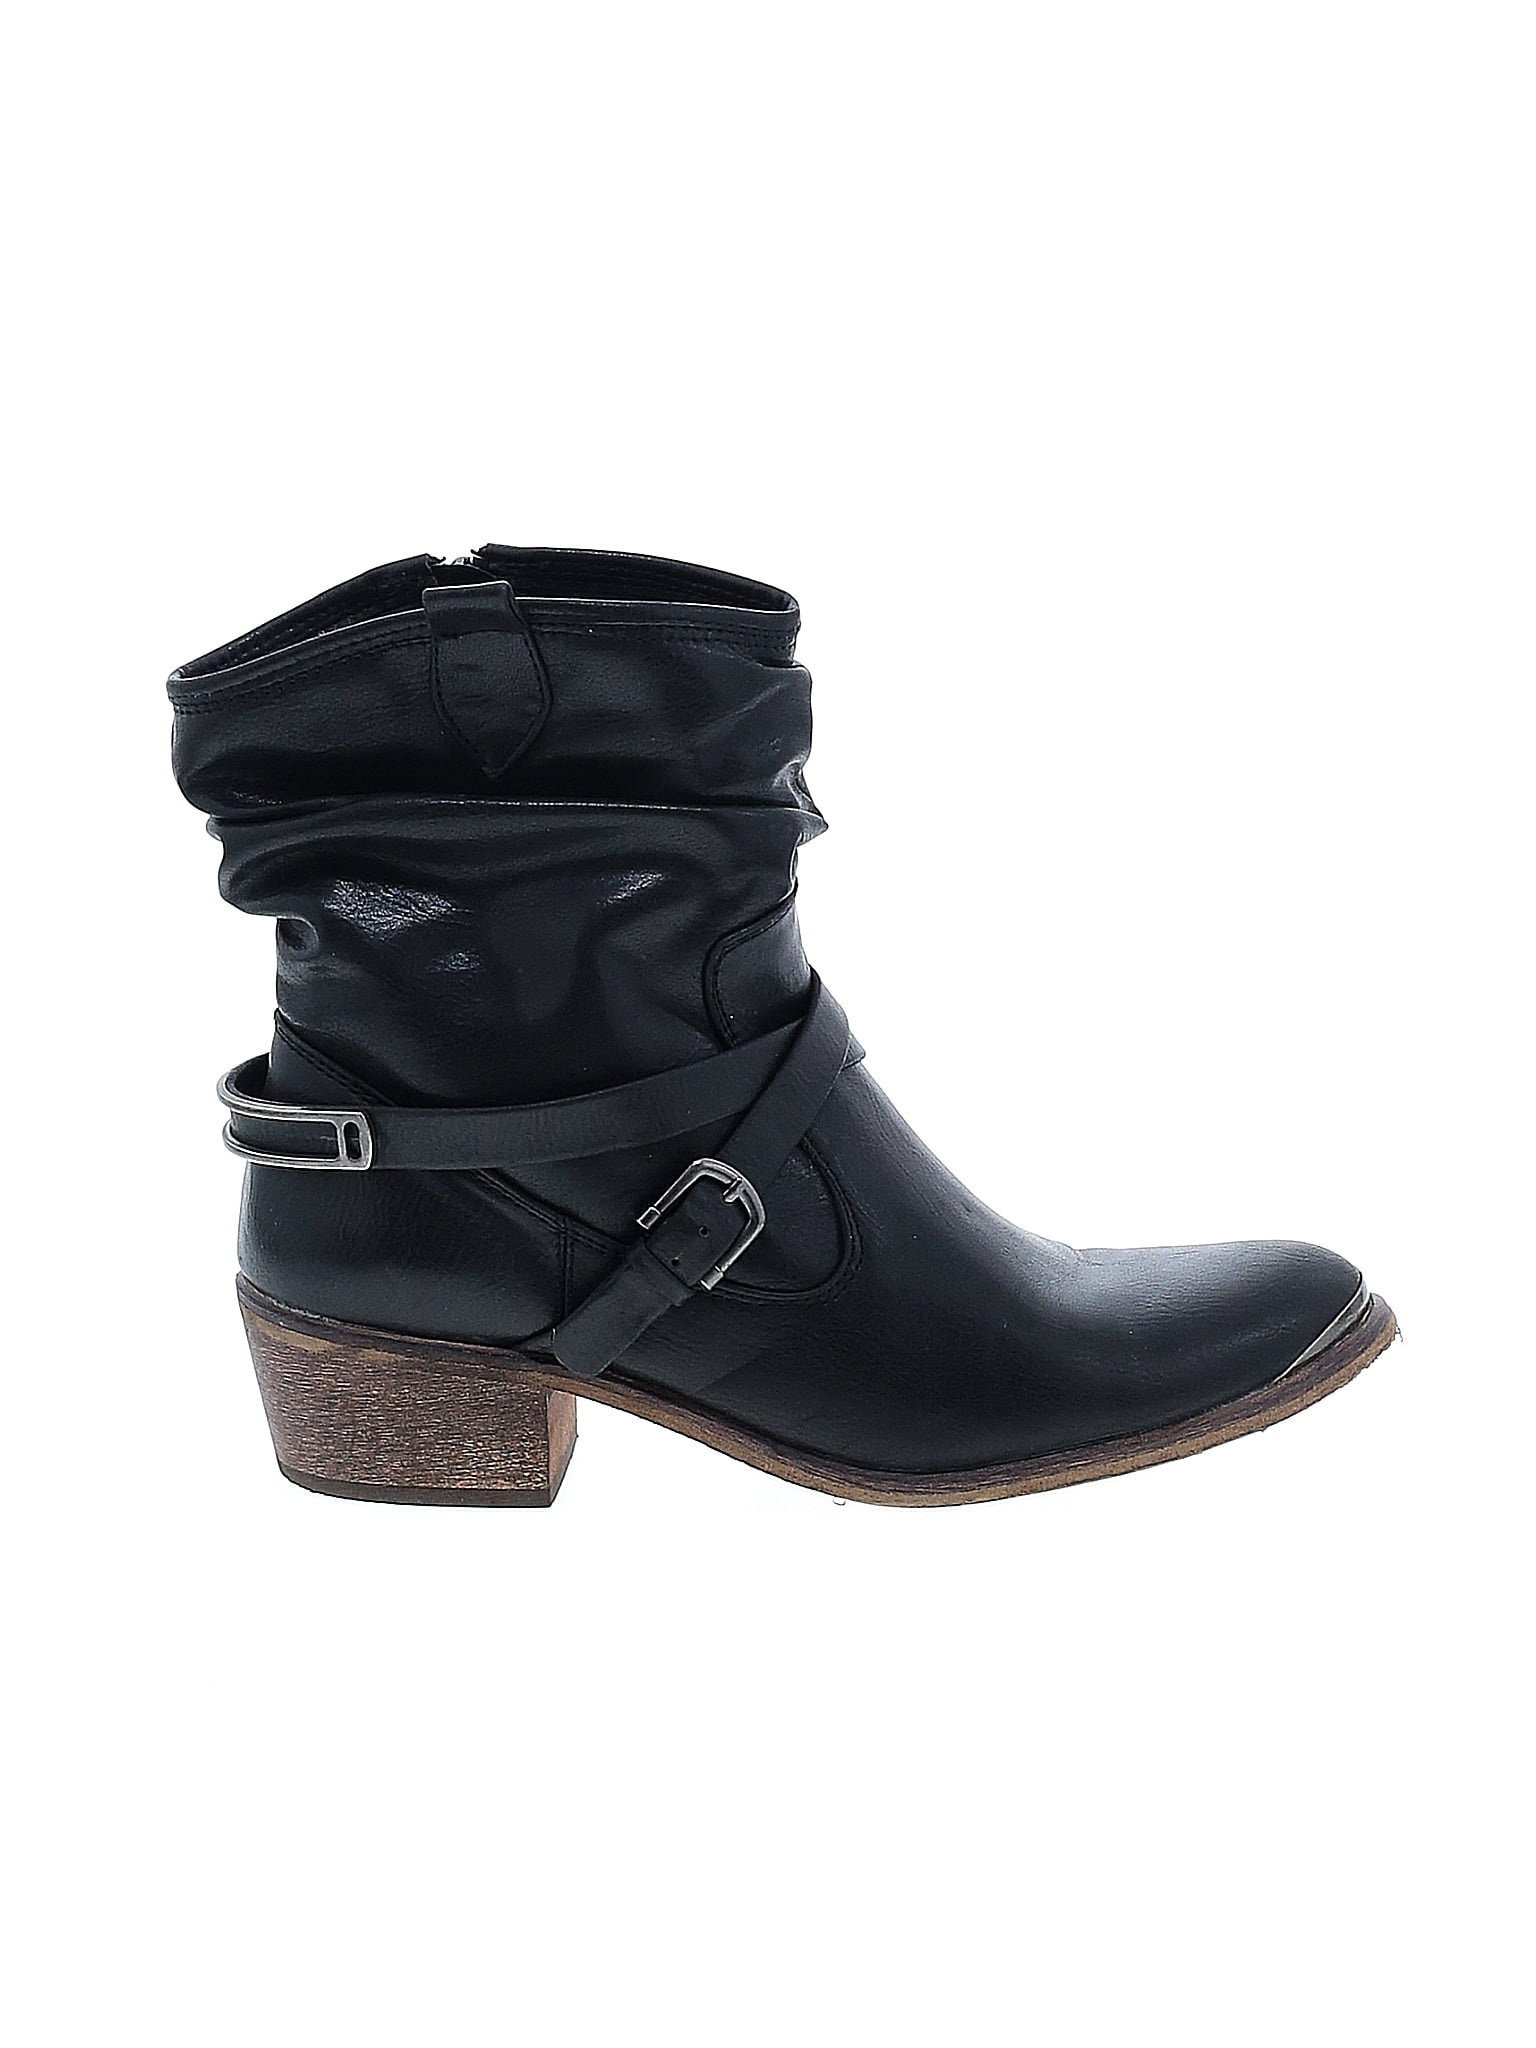 Bare Traps Solid Black Ankle Boots Size 10 - 58% off | thredUP